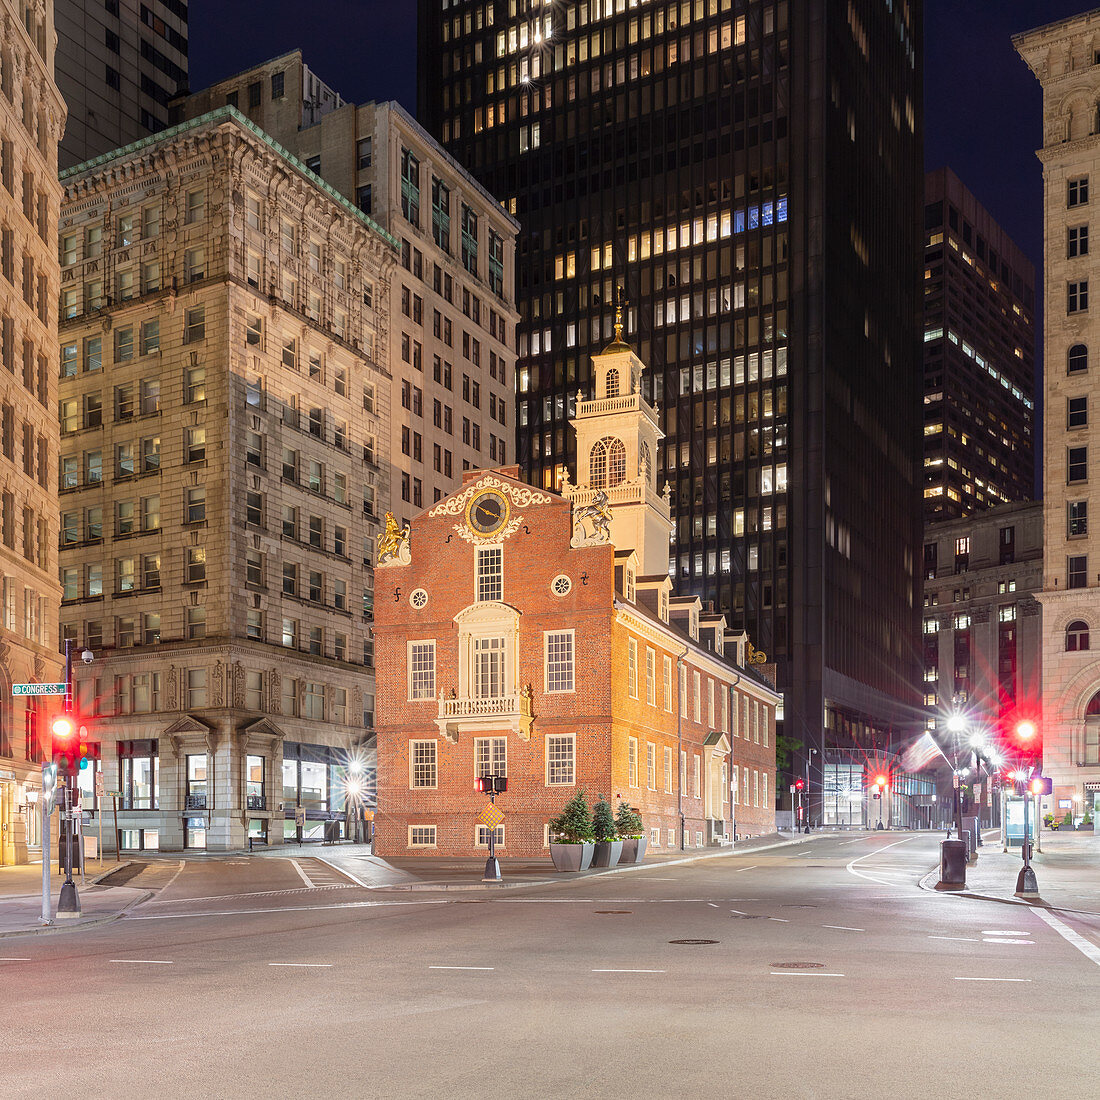 Exterior of the Old State House, Boston, Massachusetts, USA at night, during the Corona virus crisis.